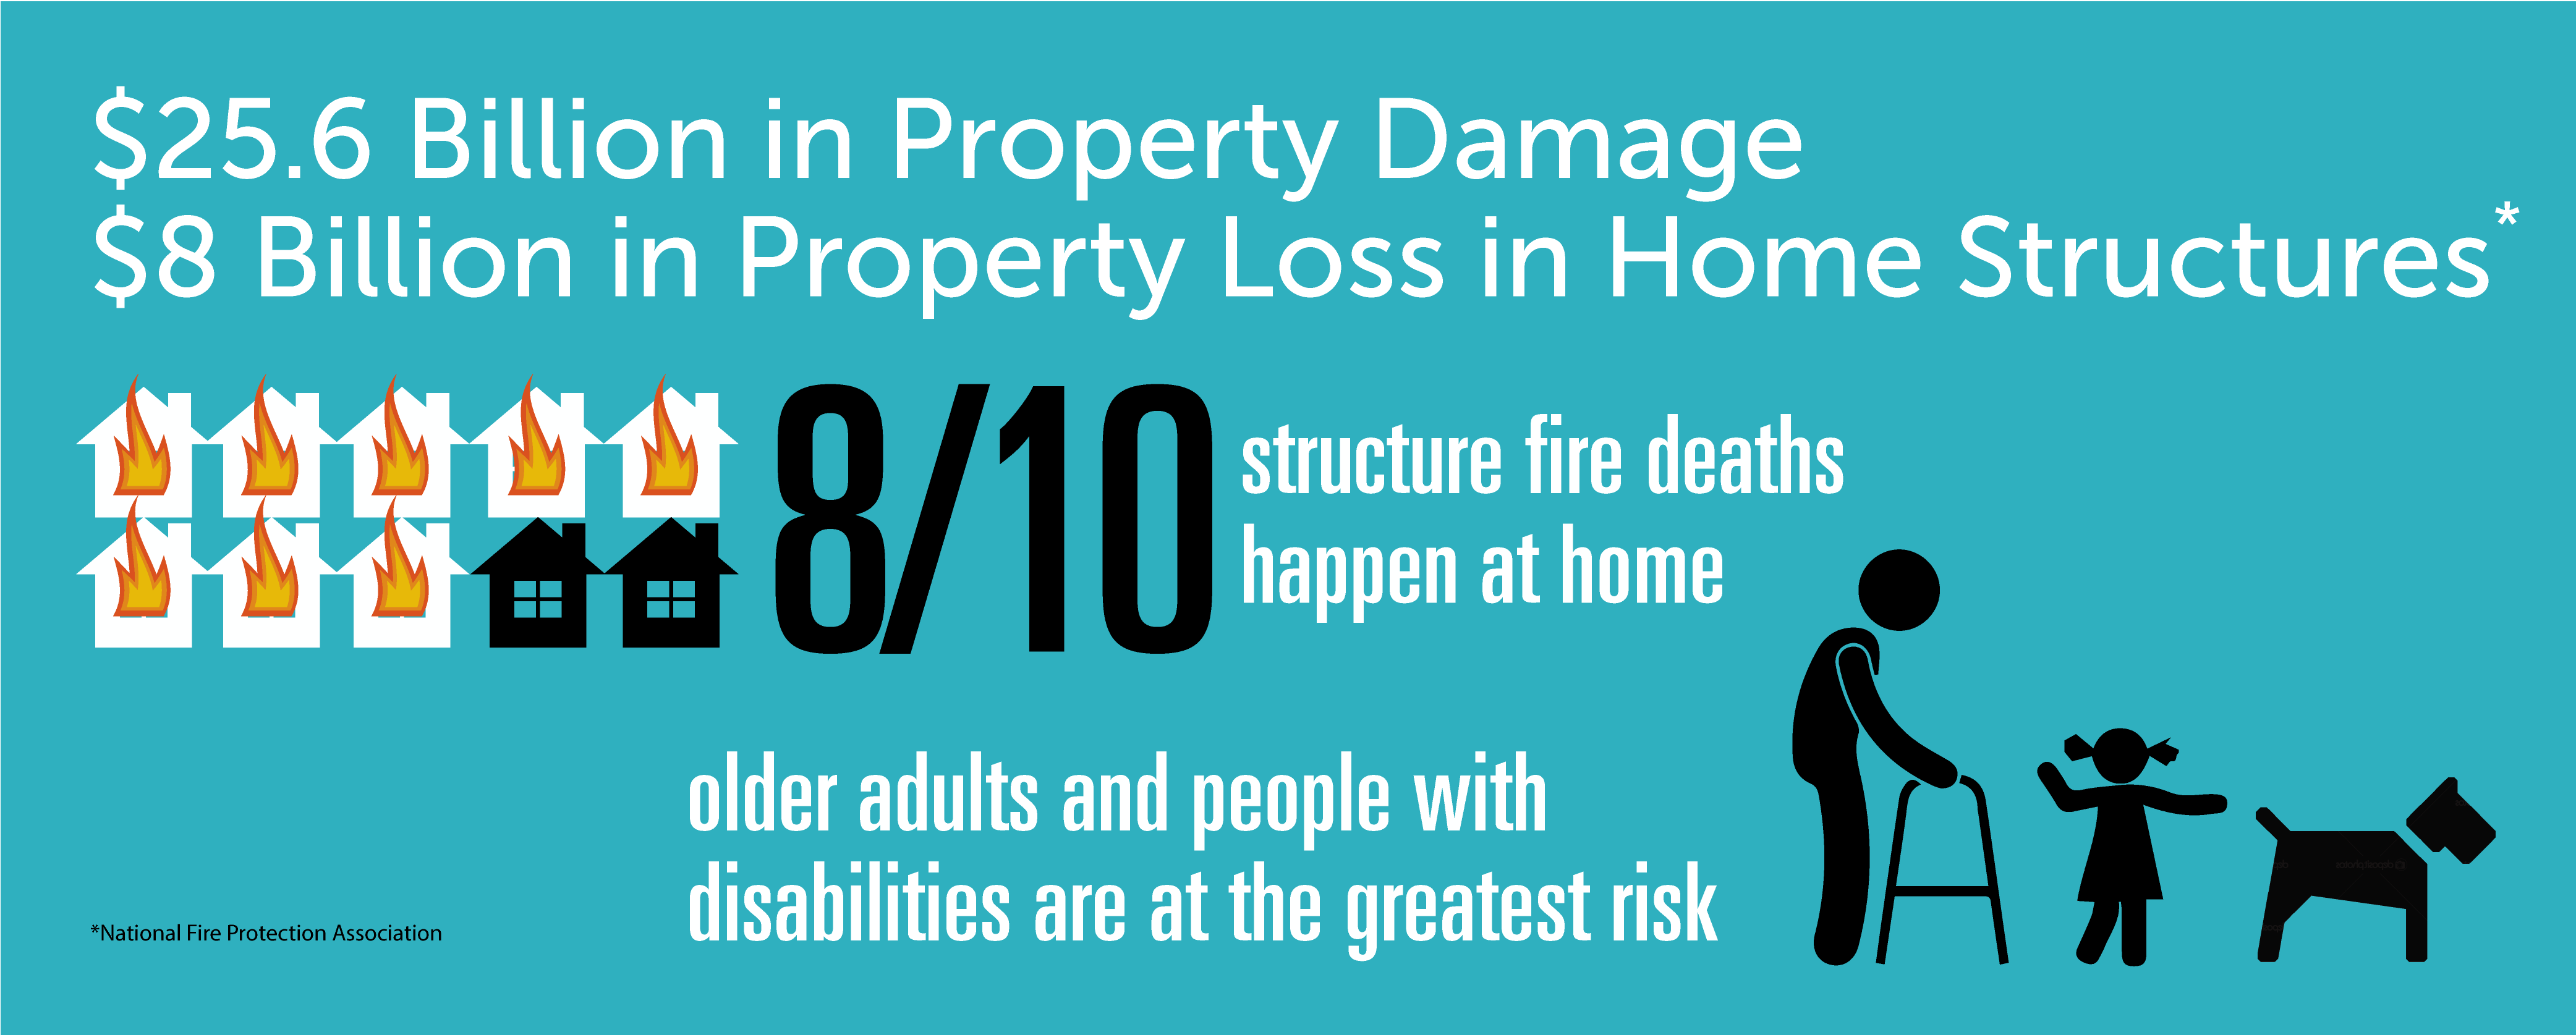 7.8 Billion in Direct Property Loss From Fire in the U.S.